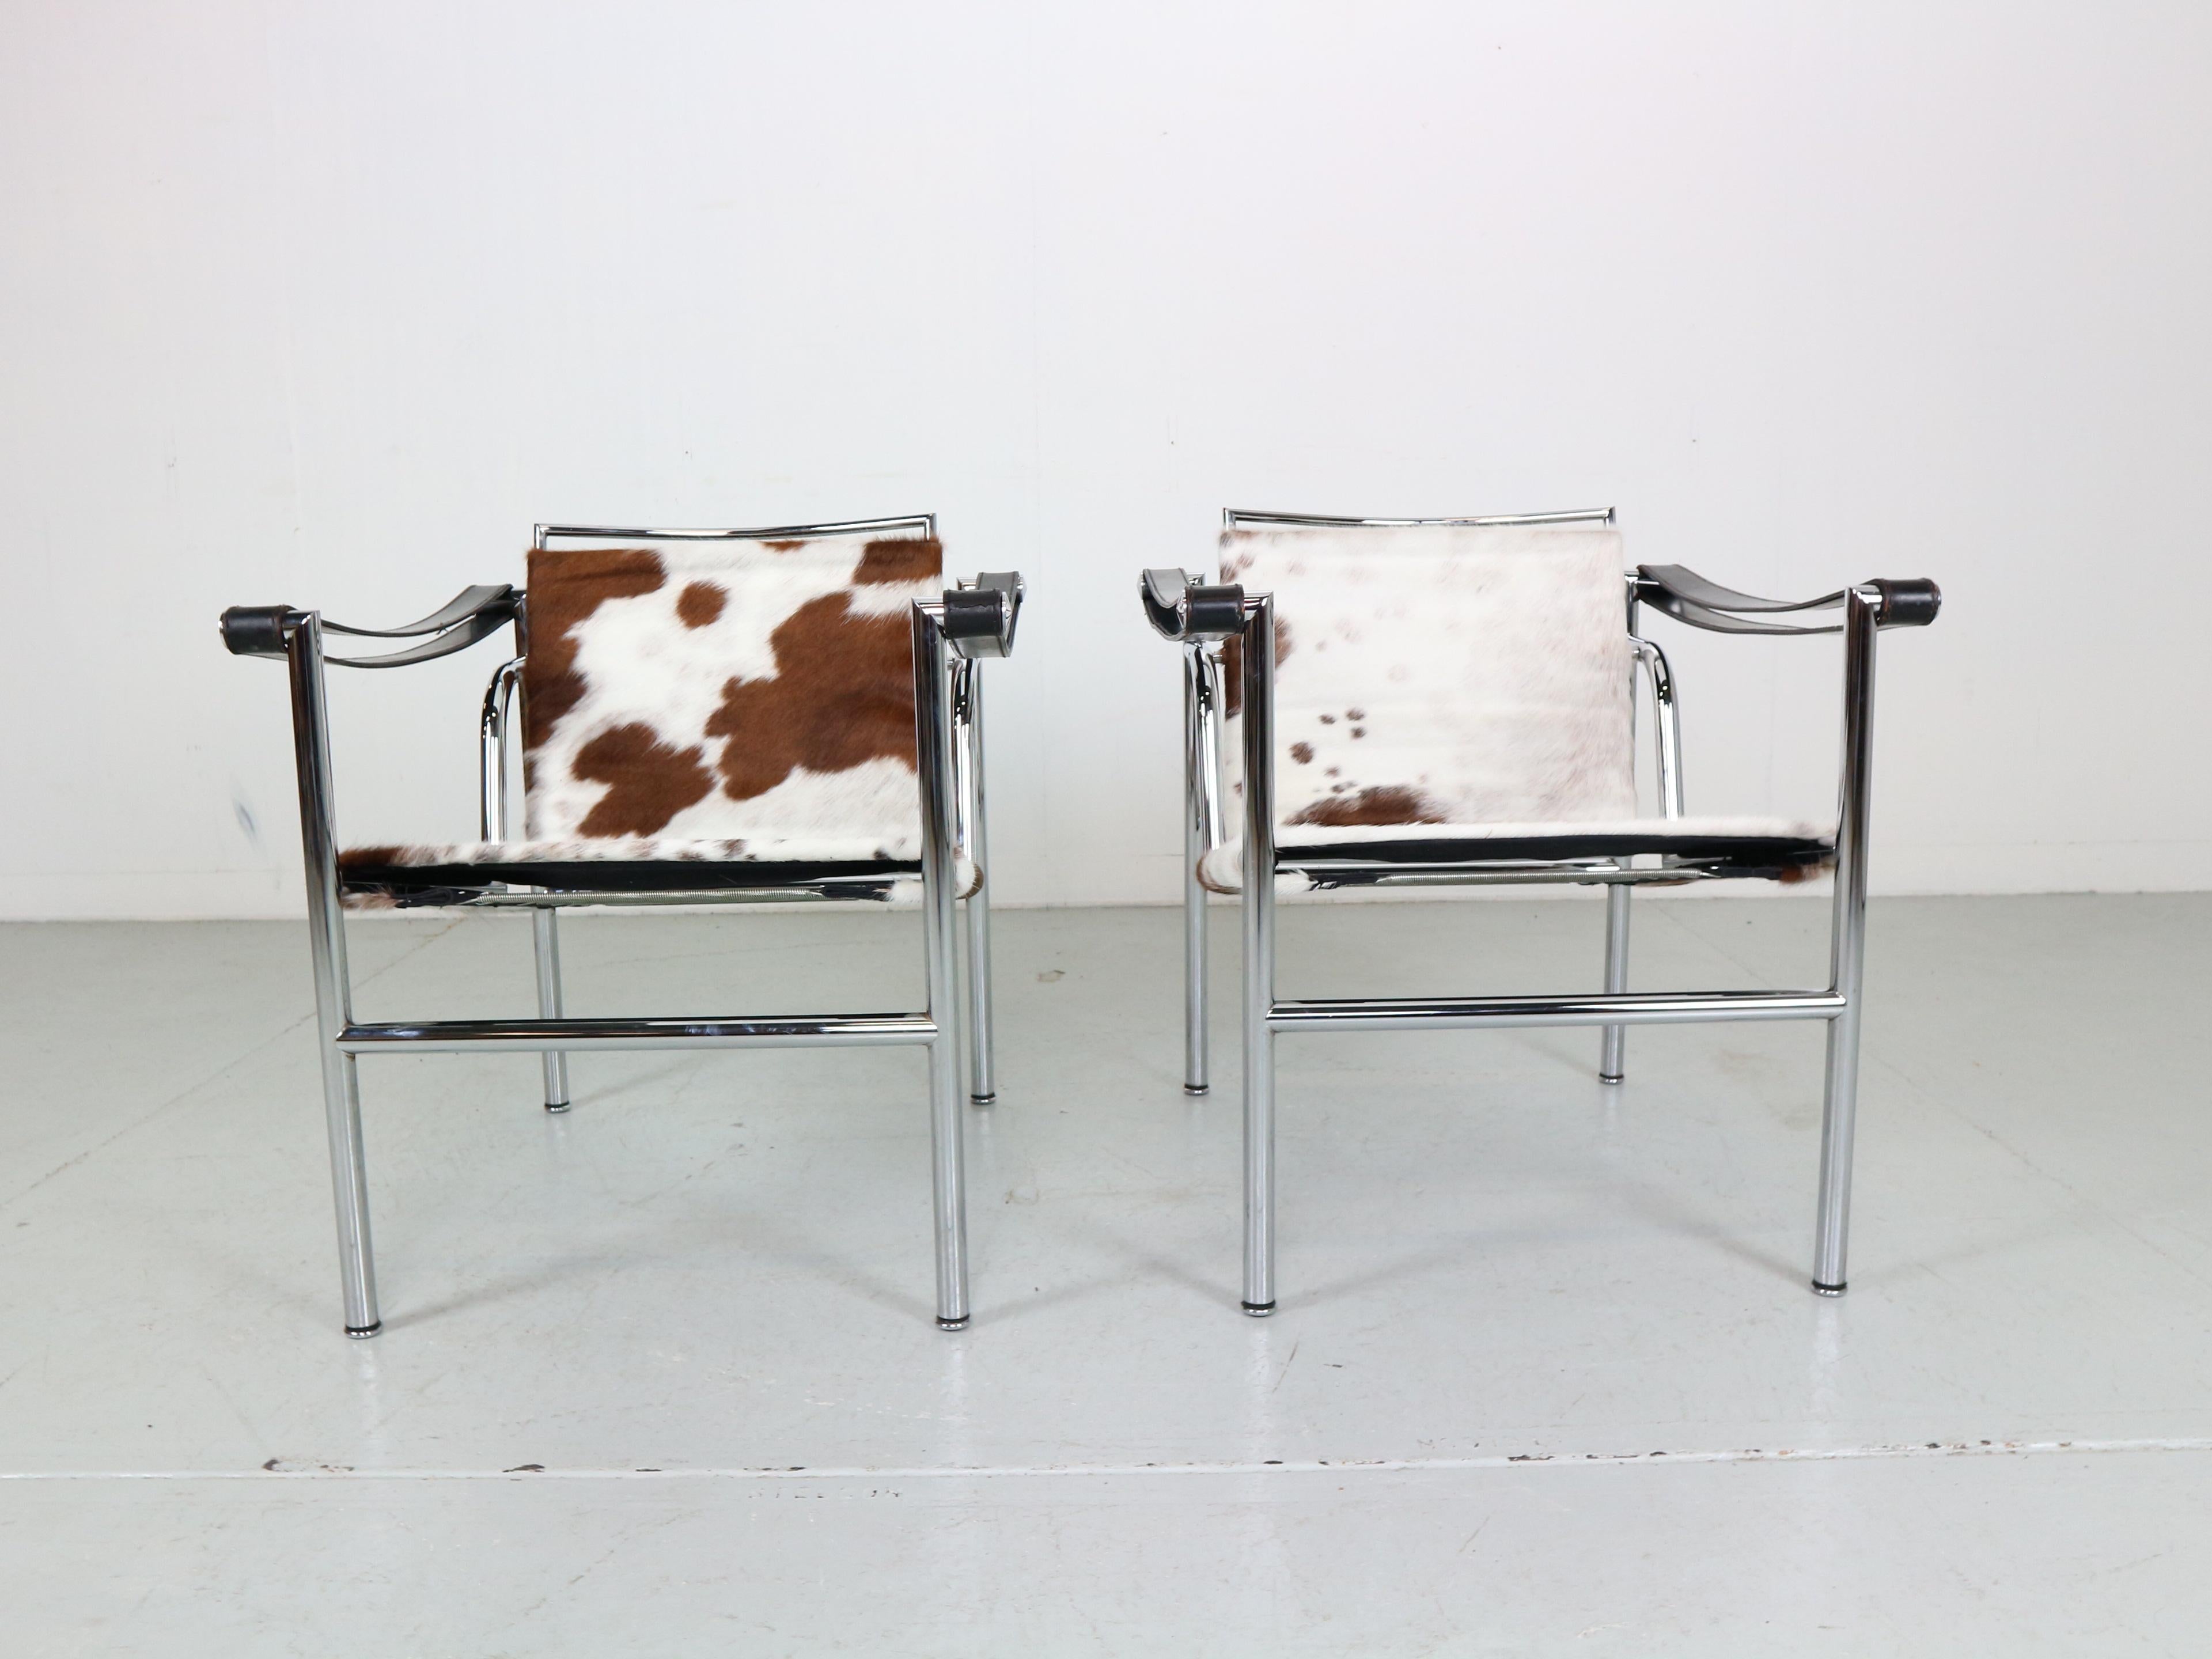 Beautiful set of 2 armchairs designed by Le Corbusier, Pierre Jeanneret and Charlotte Perriand and manufactured for Cassina, famous Italian furniture manufacture in 1970s period.
Both chairs are original signed. Model number LC1.
Chrome tubular